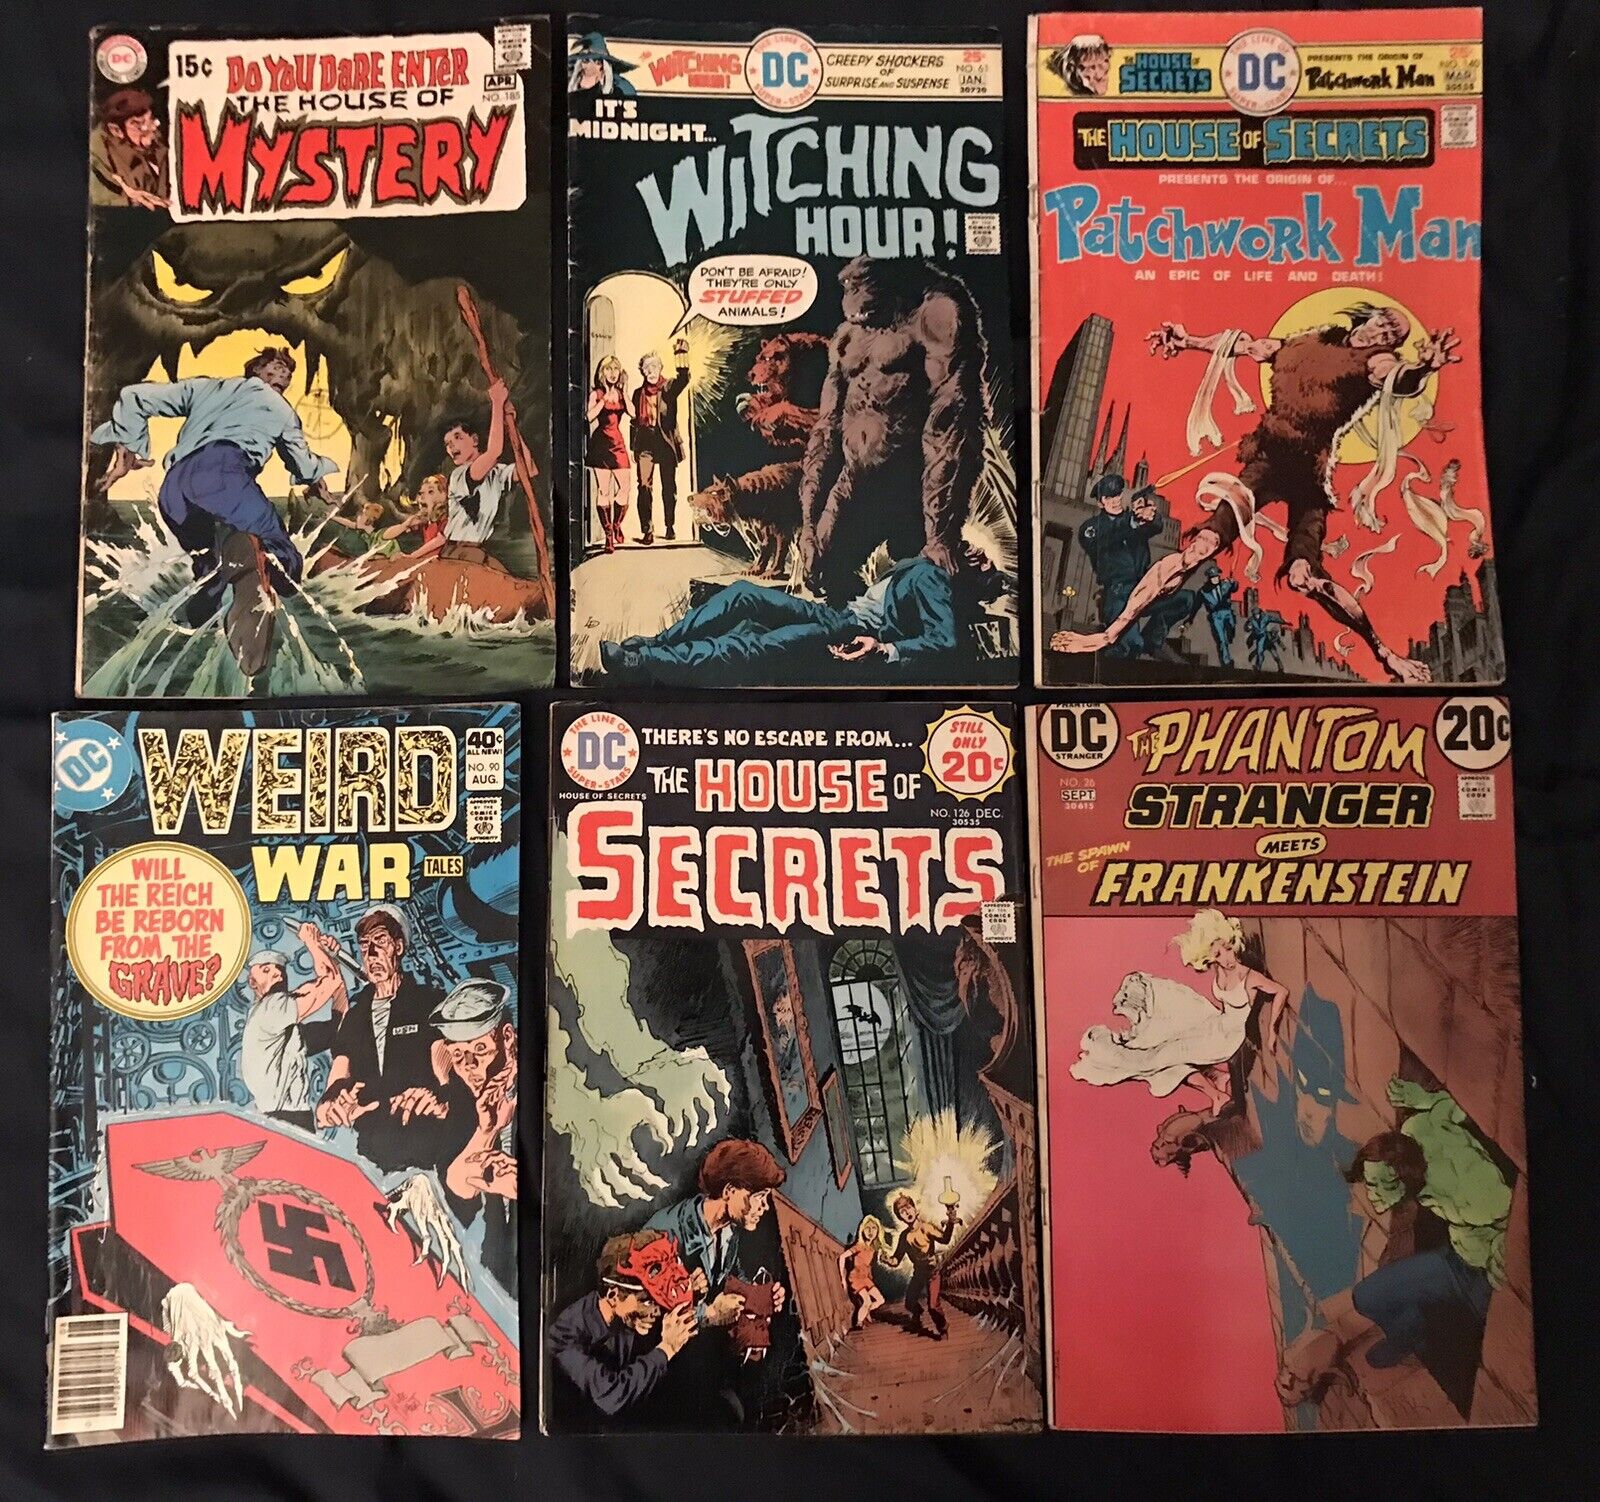 DC HORROR LOT of 6 comics: House of Secrets, House of Mystery, Witching Hour...